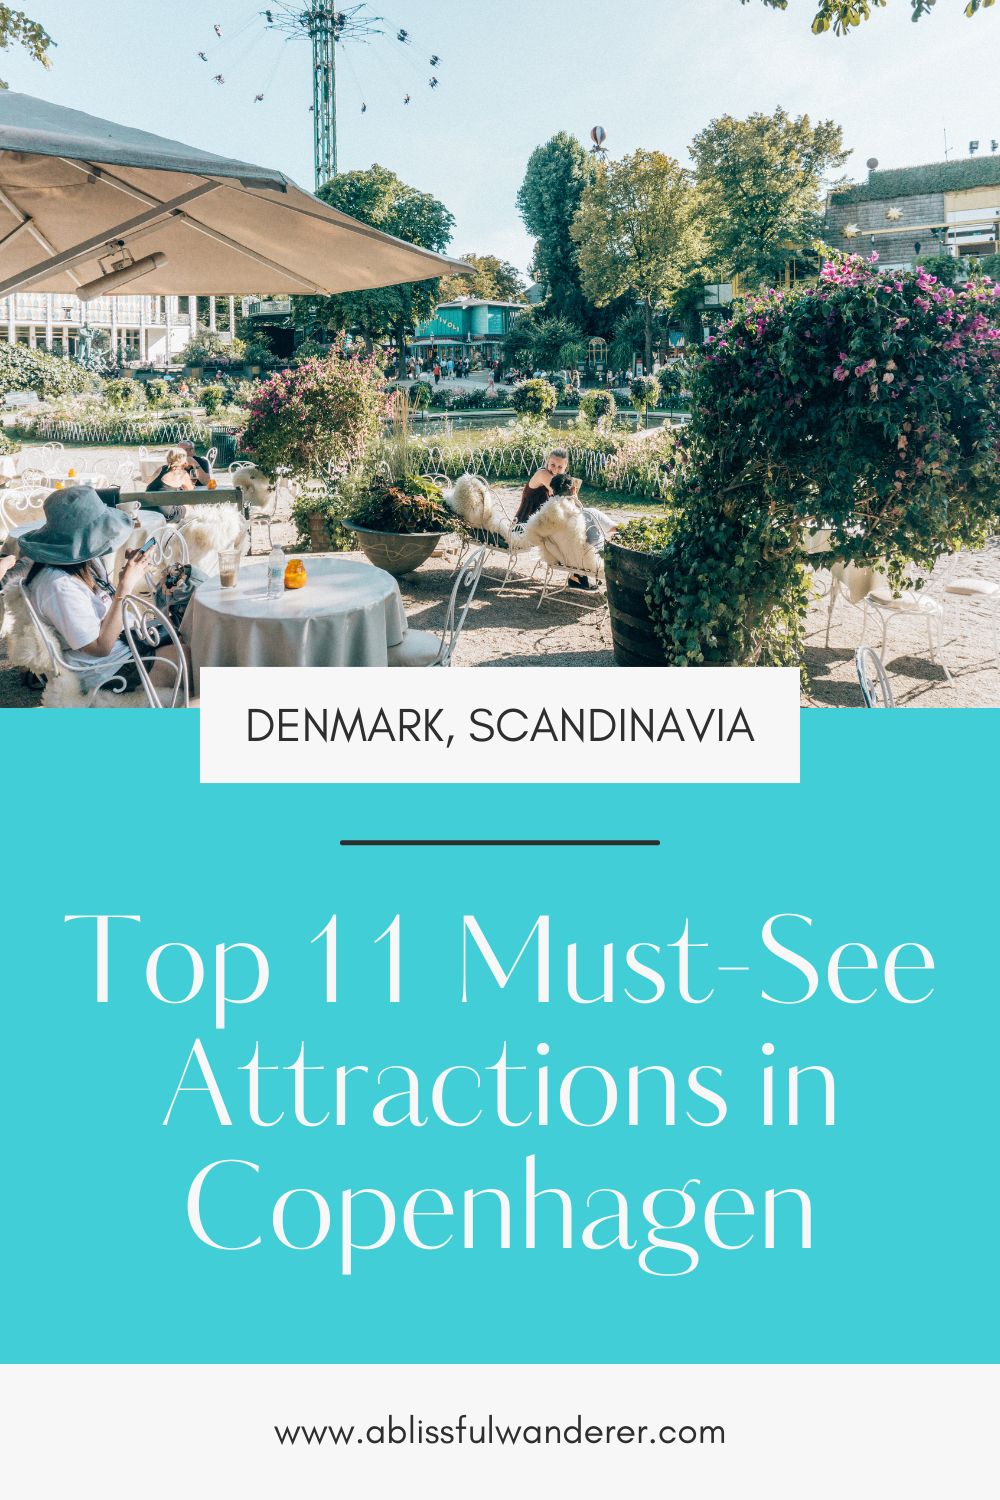 Top 11 Things to Do in Copenhagen pin with a photo of Tivoli Gardens and amusement park